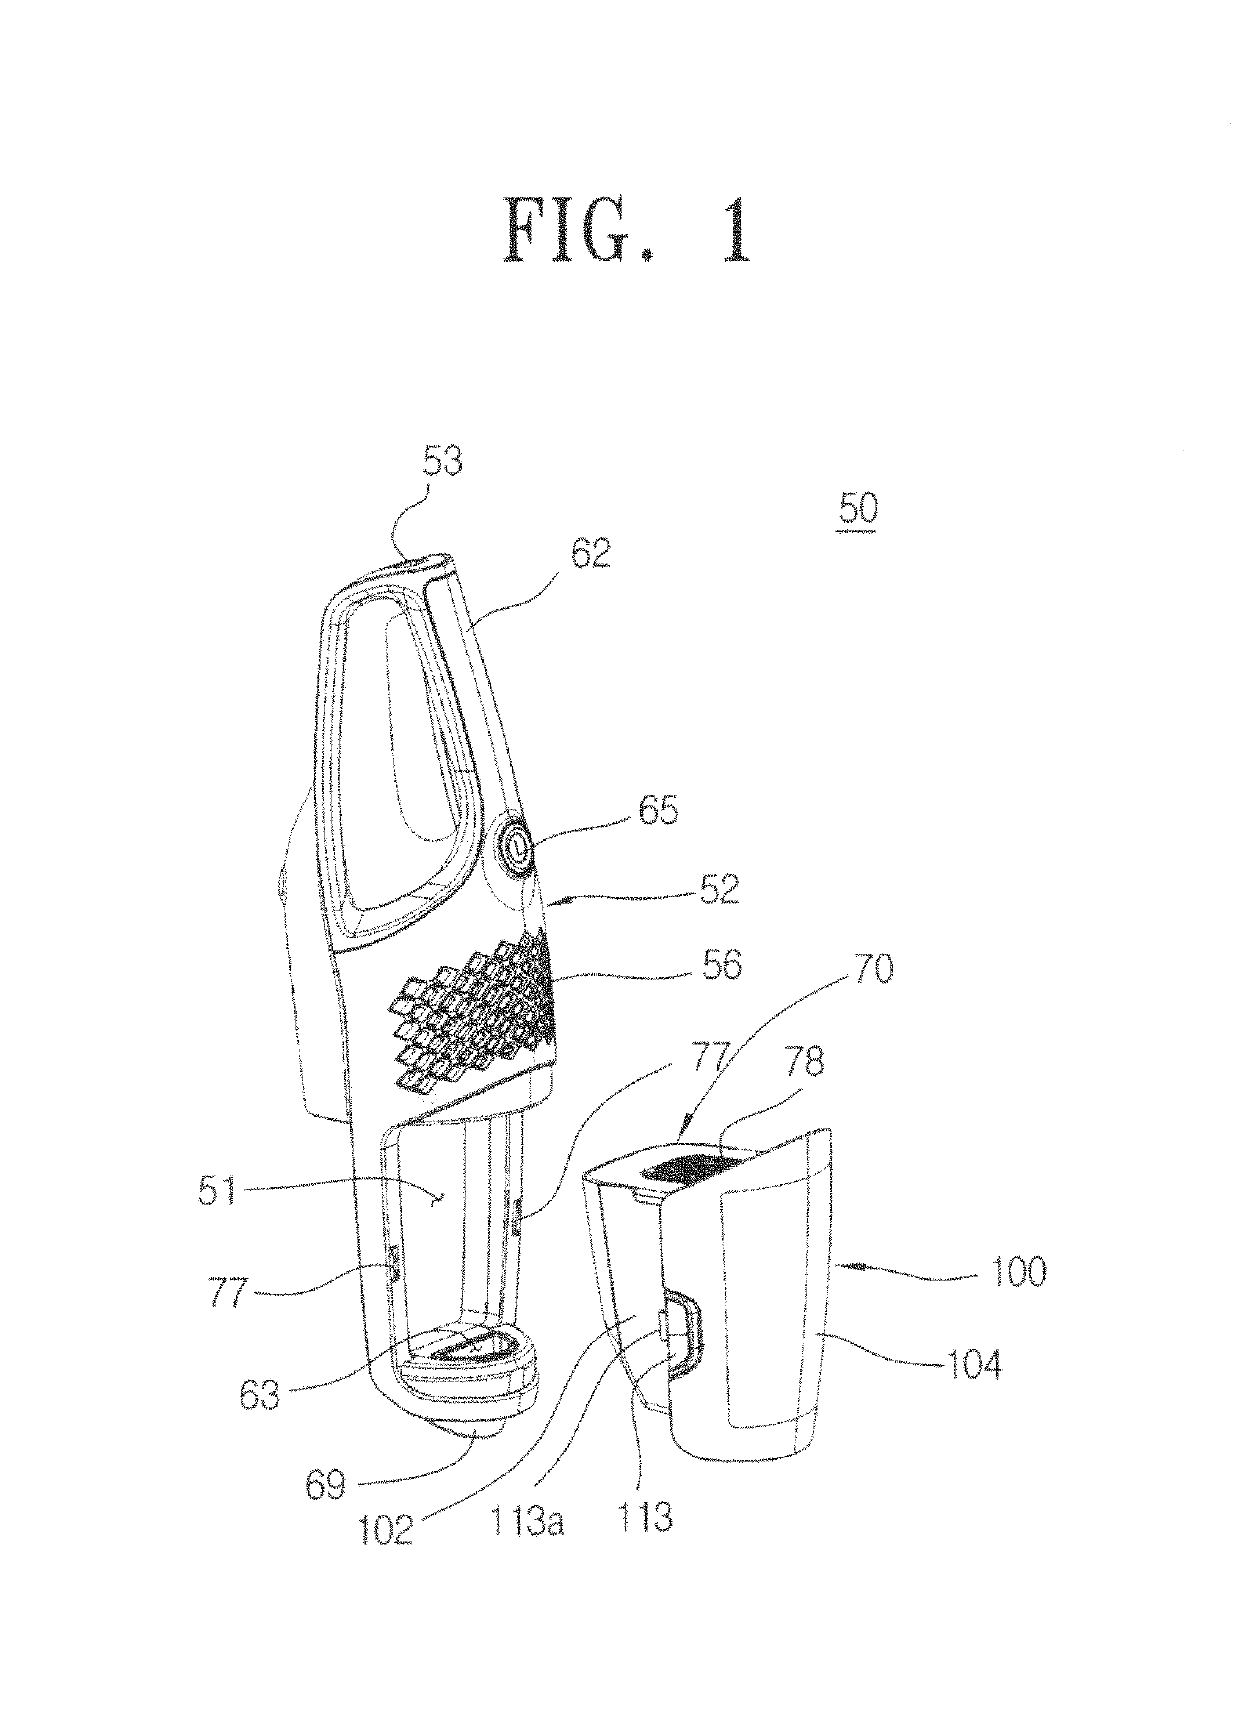 Cyclone dust collecting apparatus and hand-held cleaner having the same